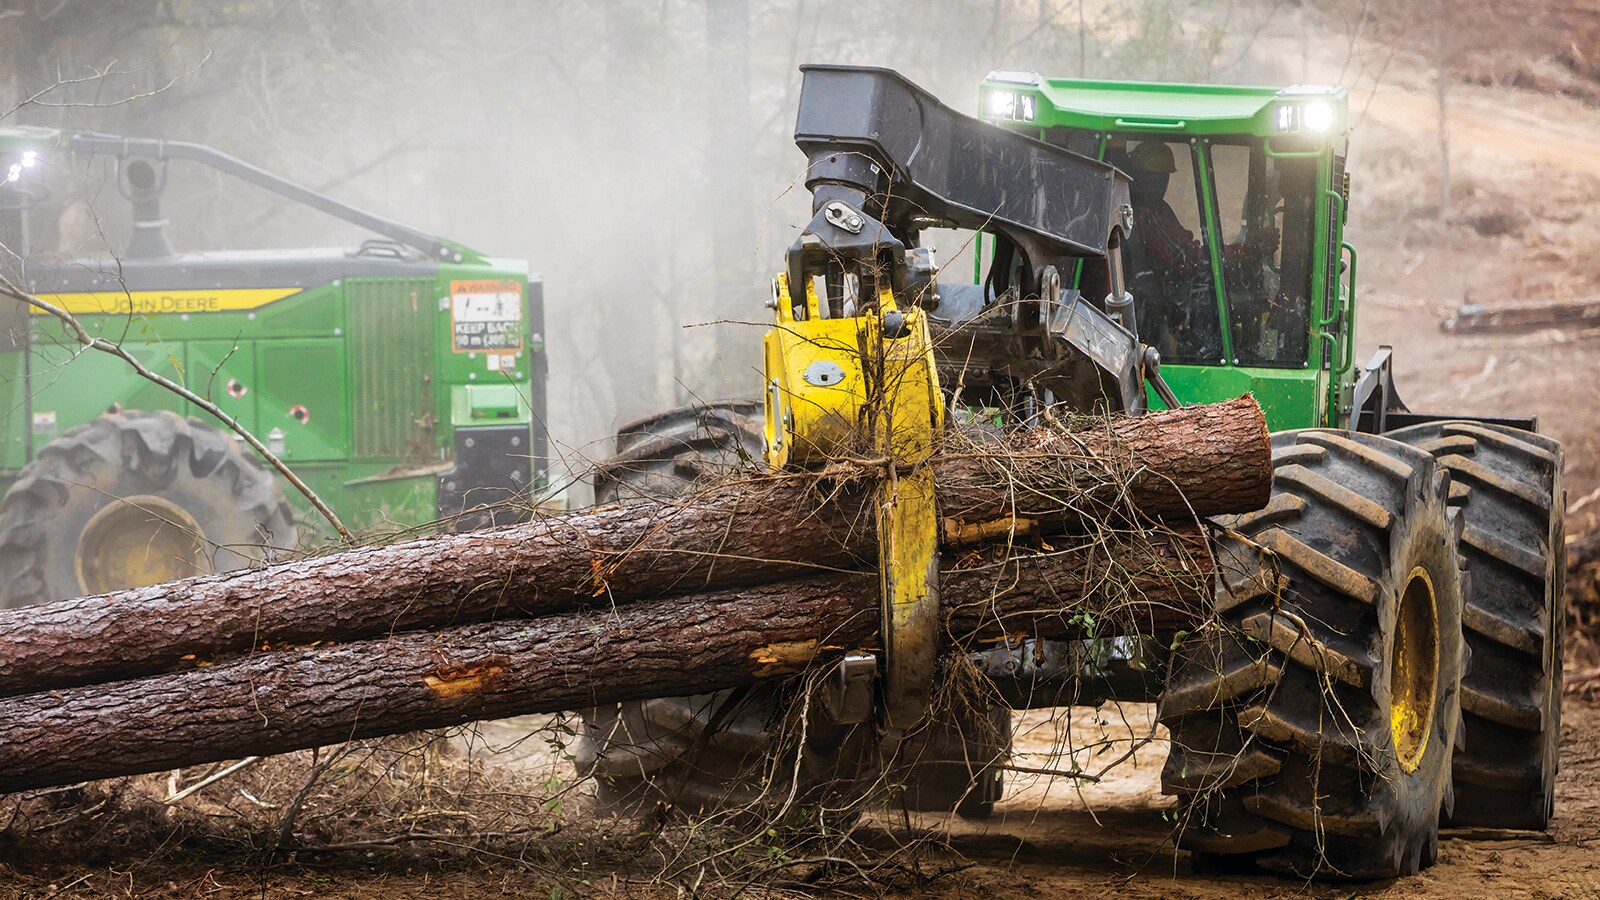 Skidder hauling a load of logs through a cloud of dust